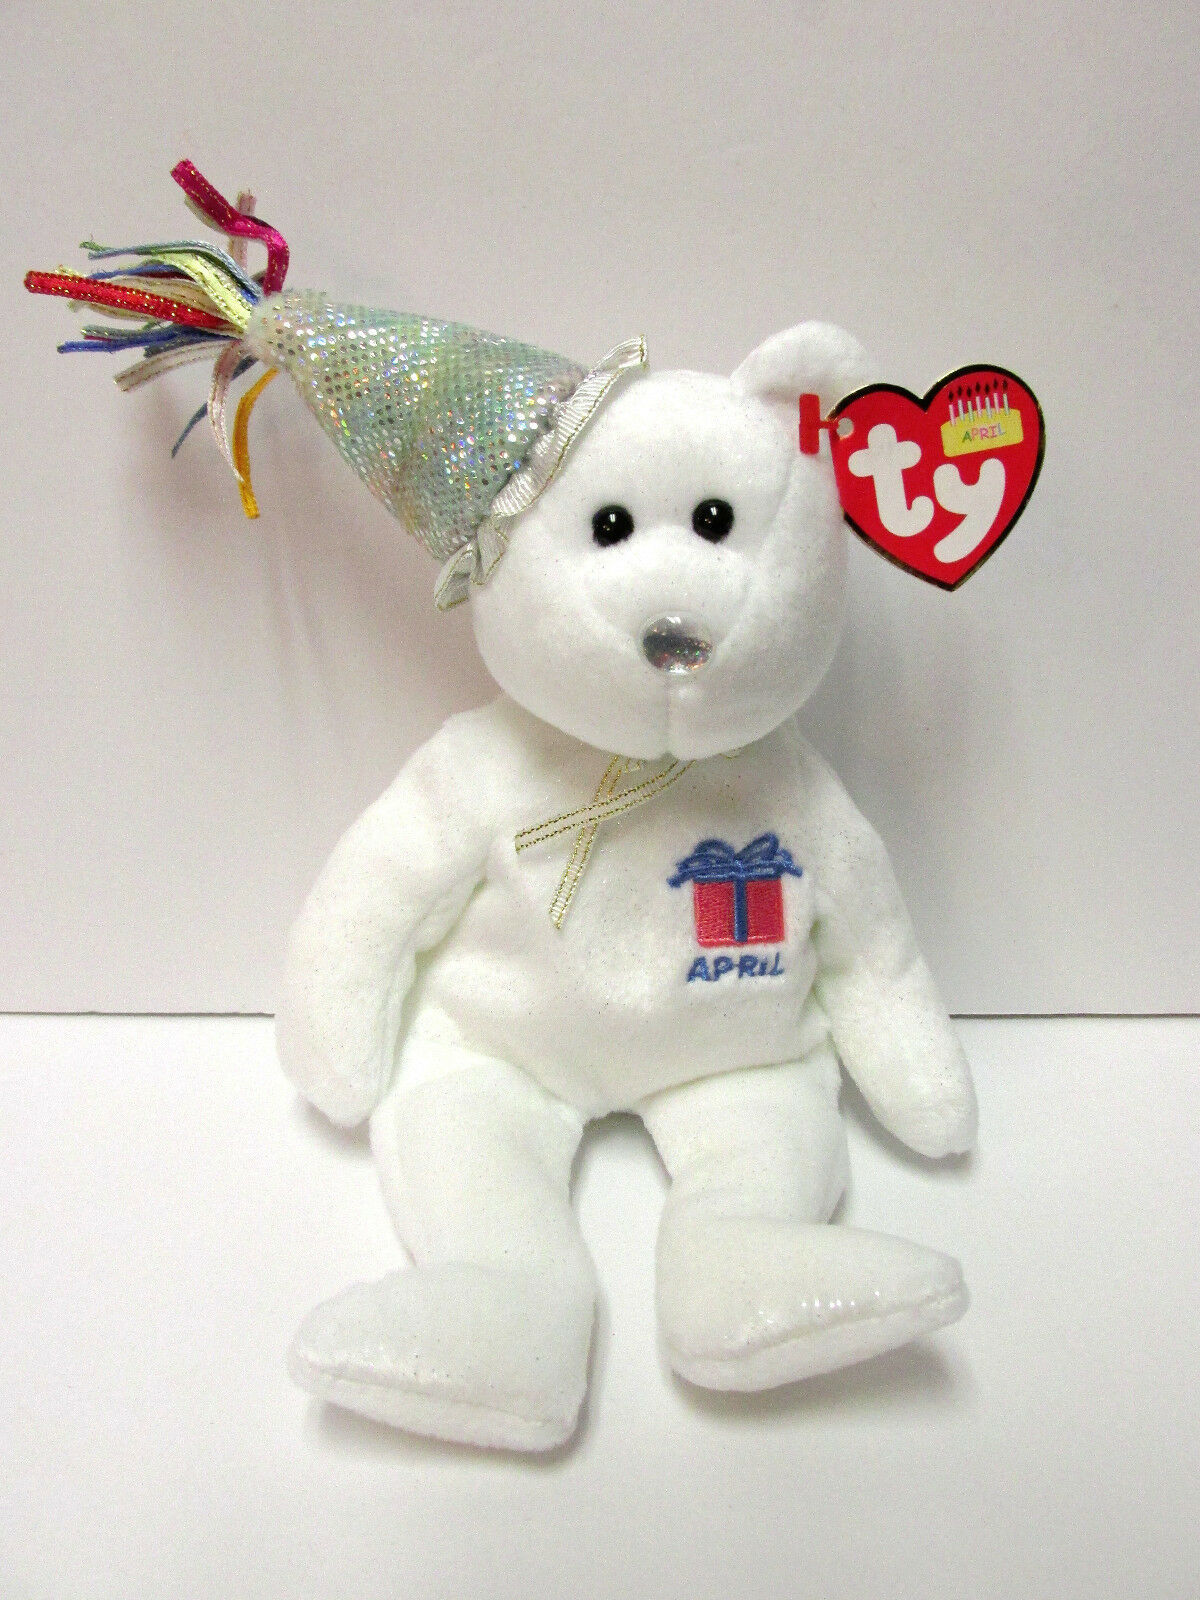 April Beanie Babies Price Guide – Love My Beanies